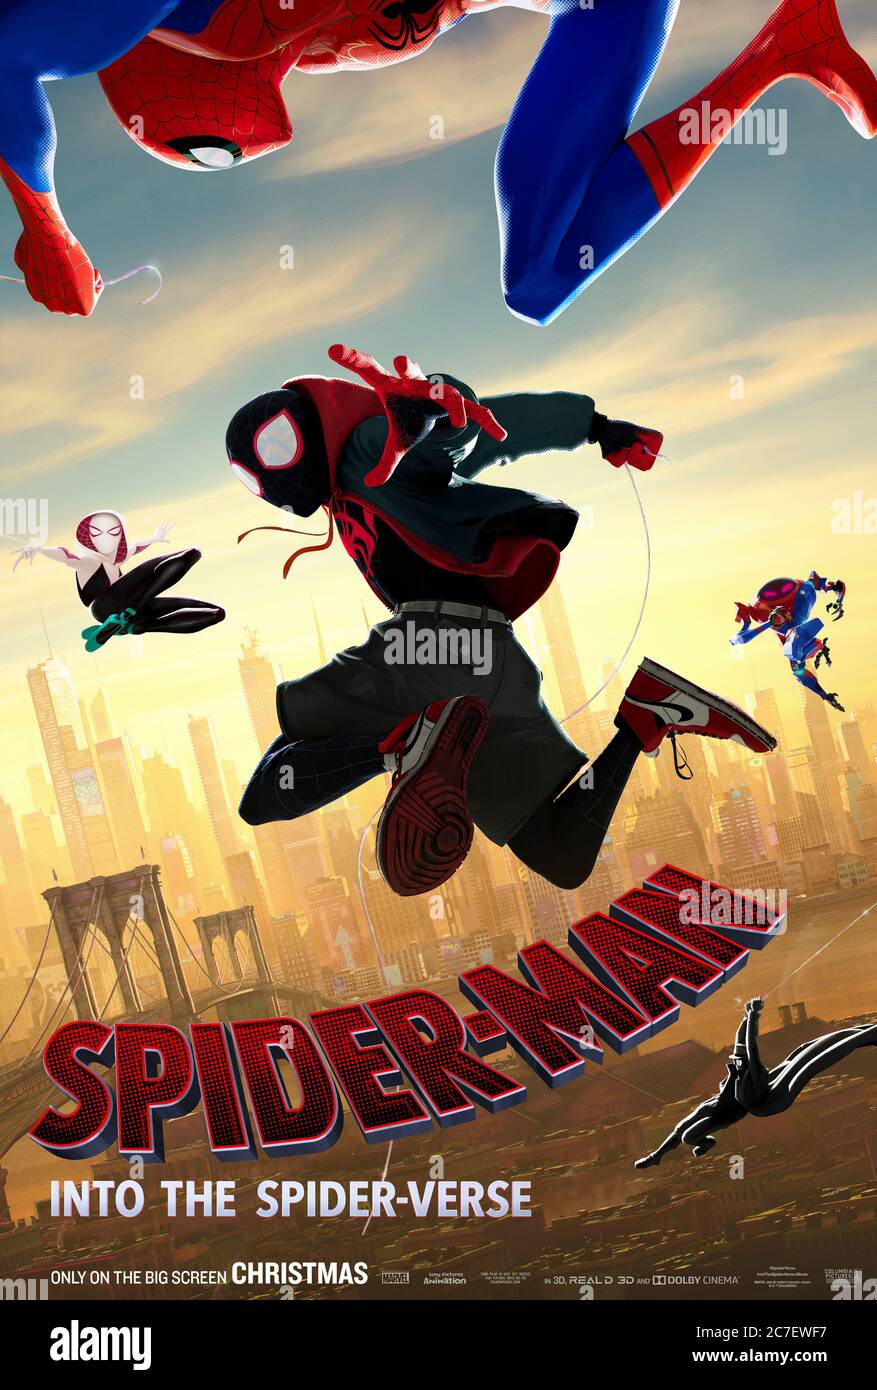 Spider-Man: Into the Spider-Verse (2018) directed by Bob Persichetti and Peter Ramsey and starring Shameik Moore, Jake Johnson and Hailee Steinfeld. Stylish animation about Spider-Man teaming up with other versions from different dimensions. Stock Photo